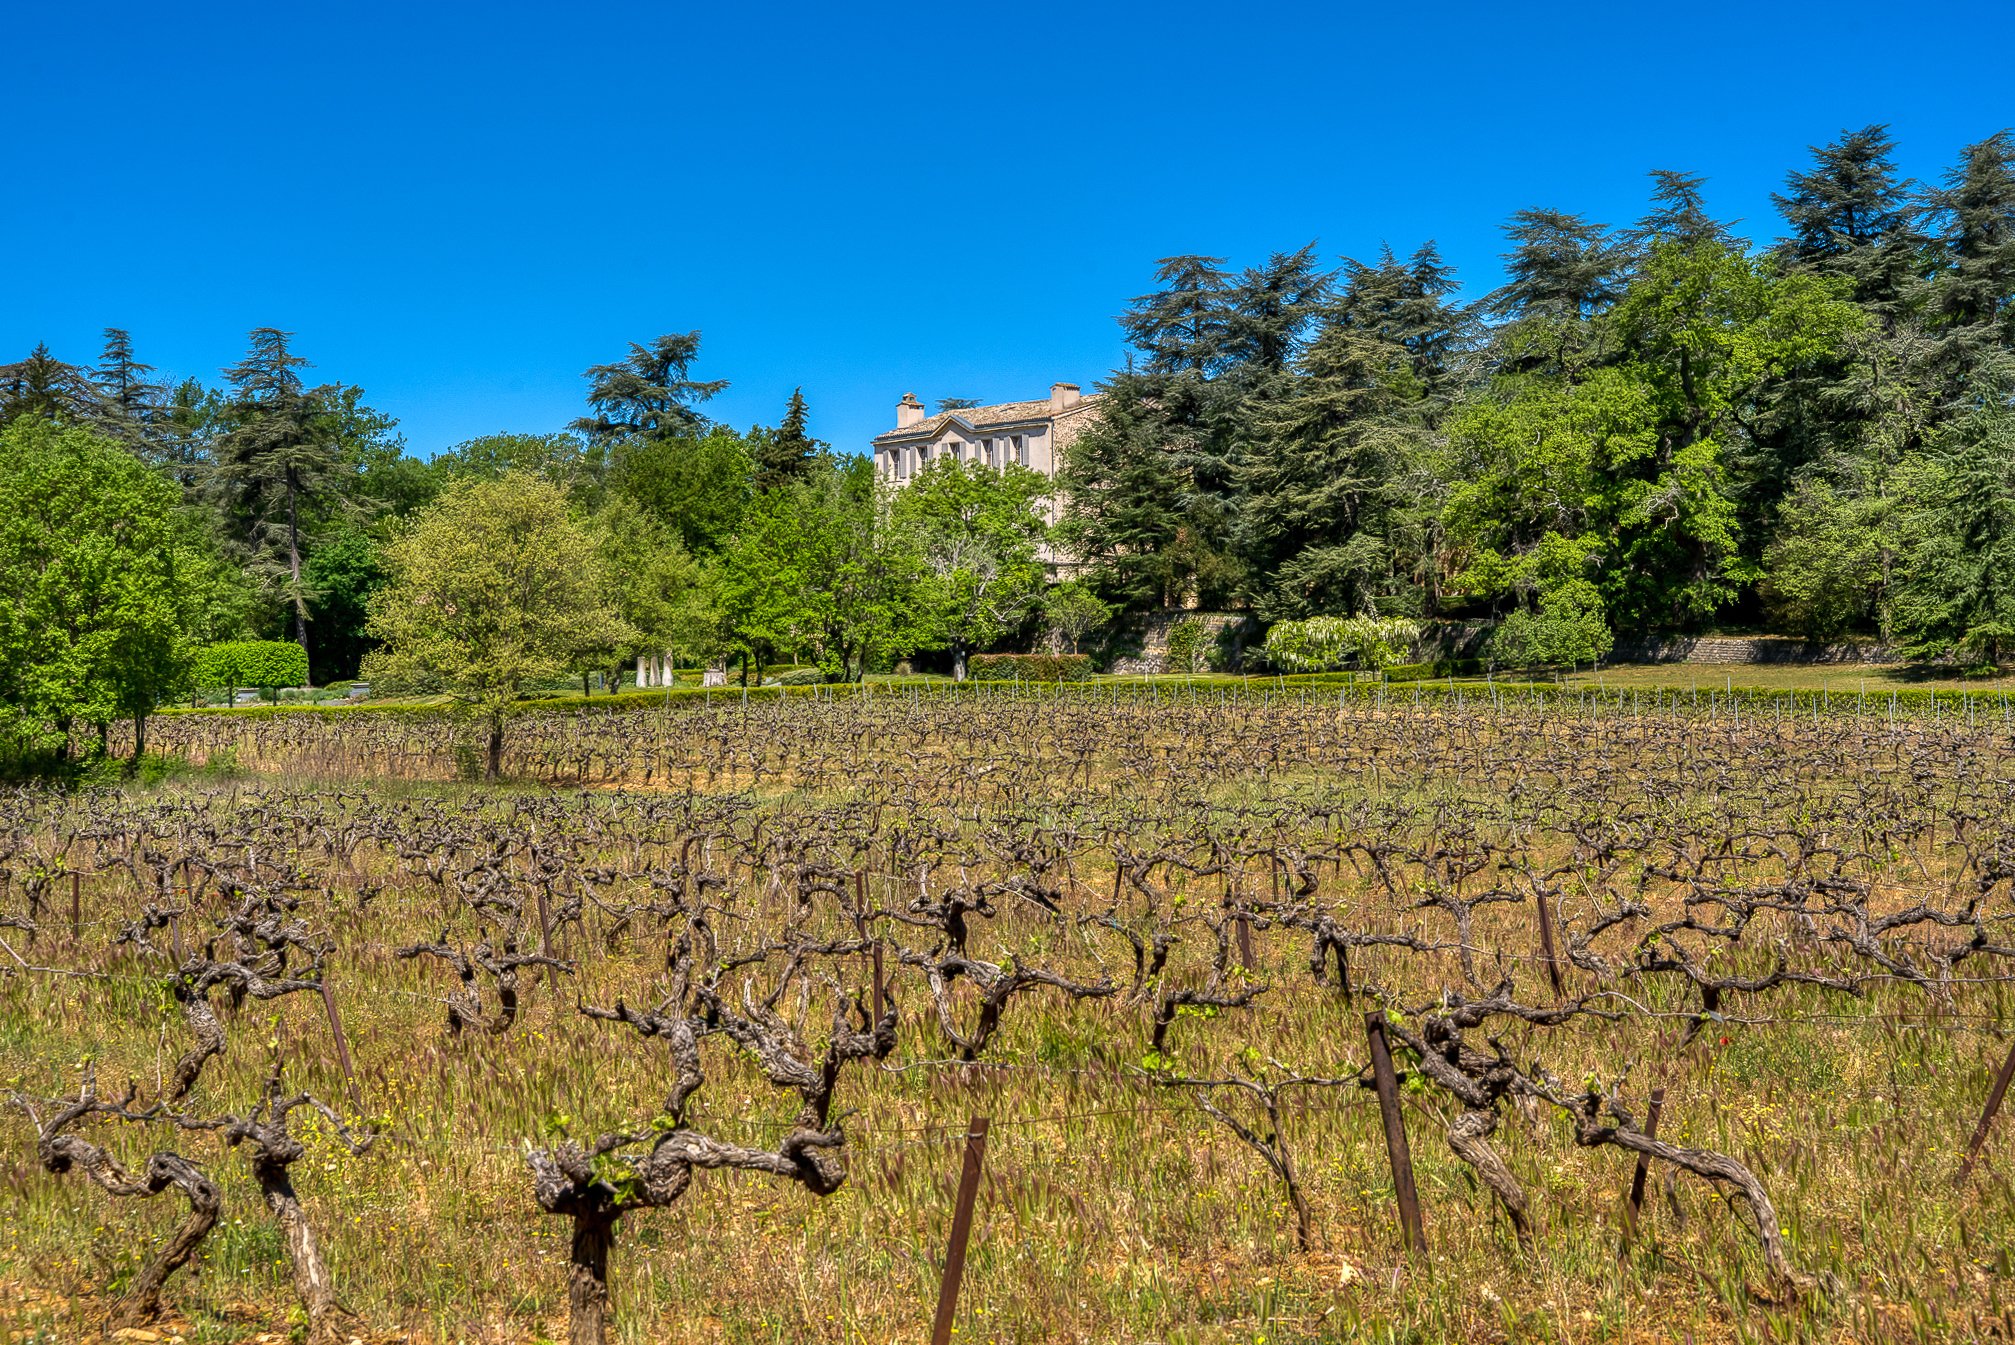 Francis York Luxury French Chateau and Vineyard in the Var, Provence 11.jpg